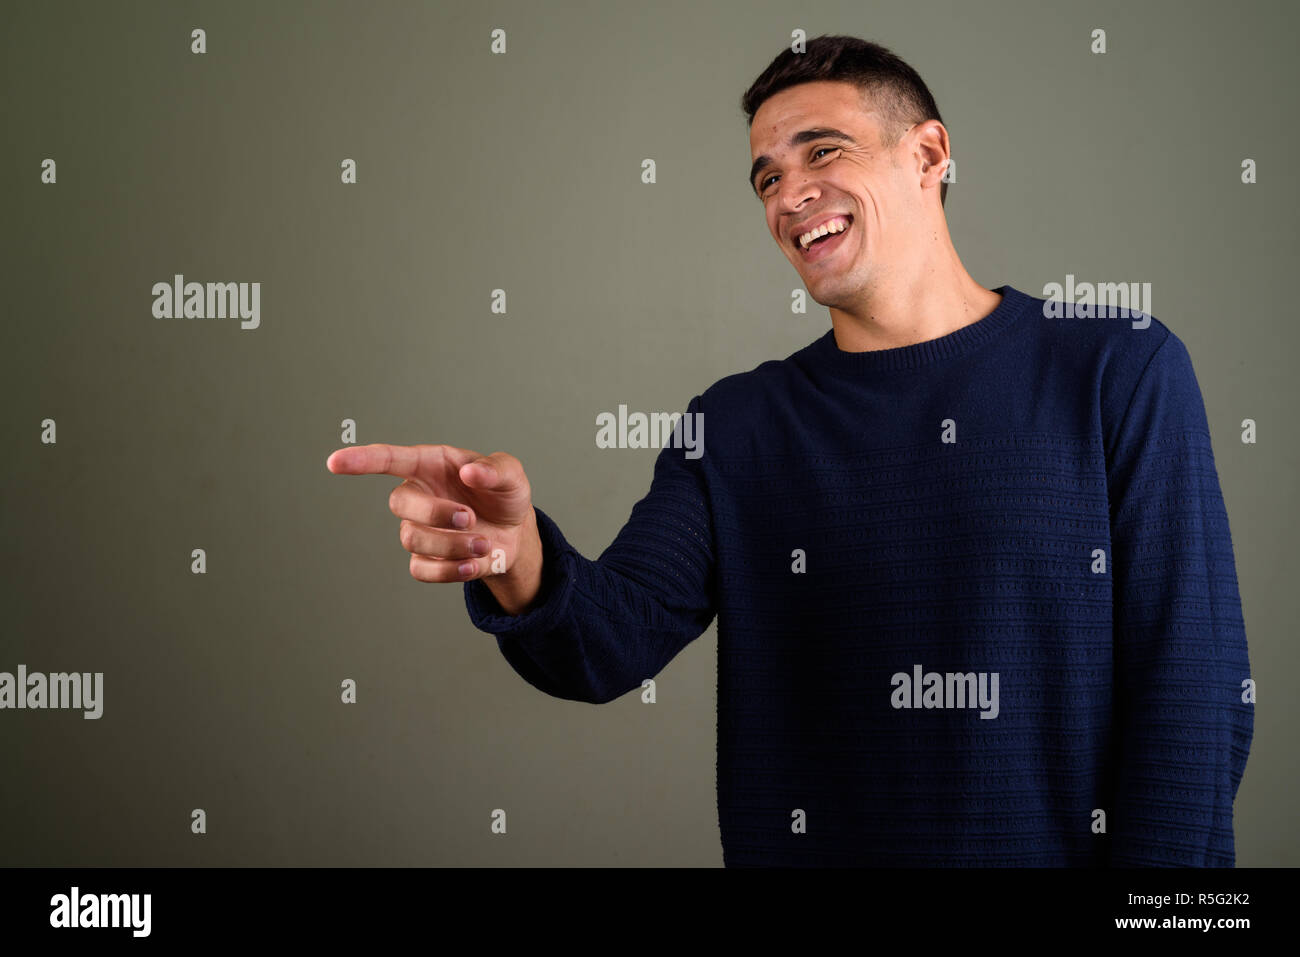 Young handsome man wearing sweater against colored background Stock Photo